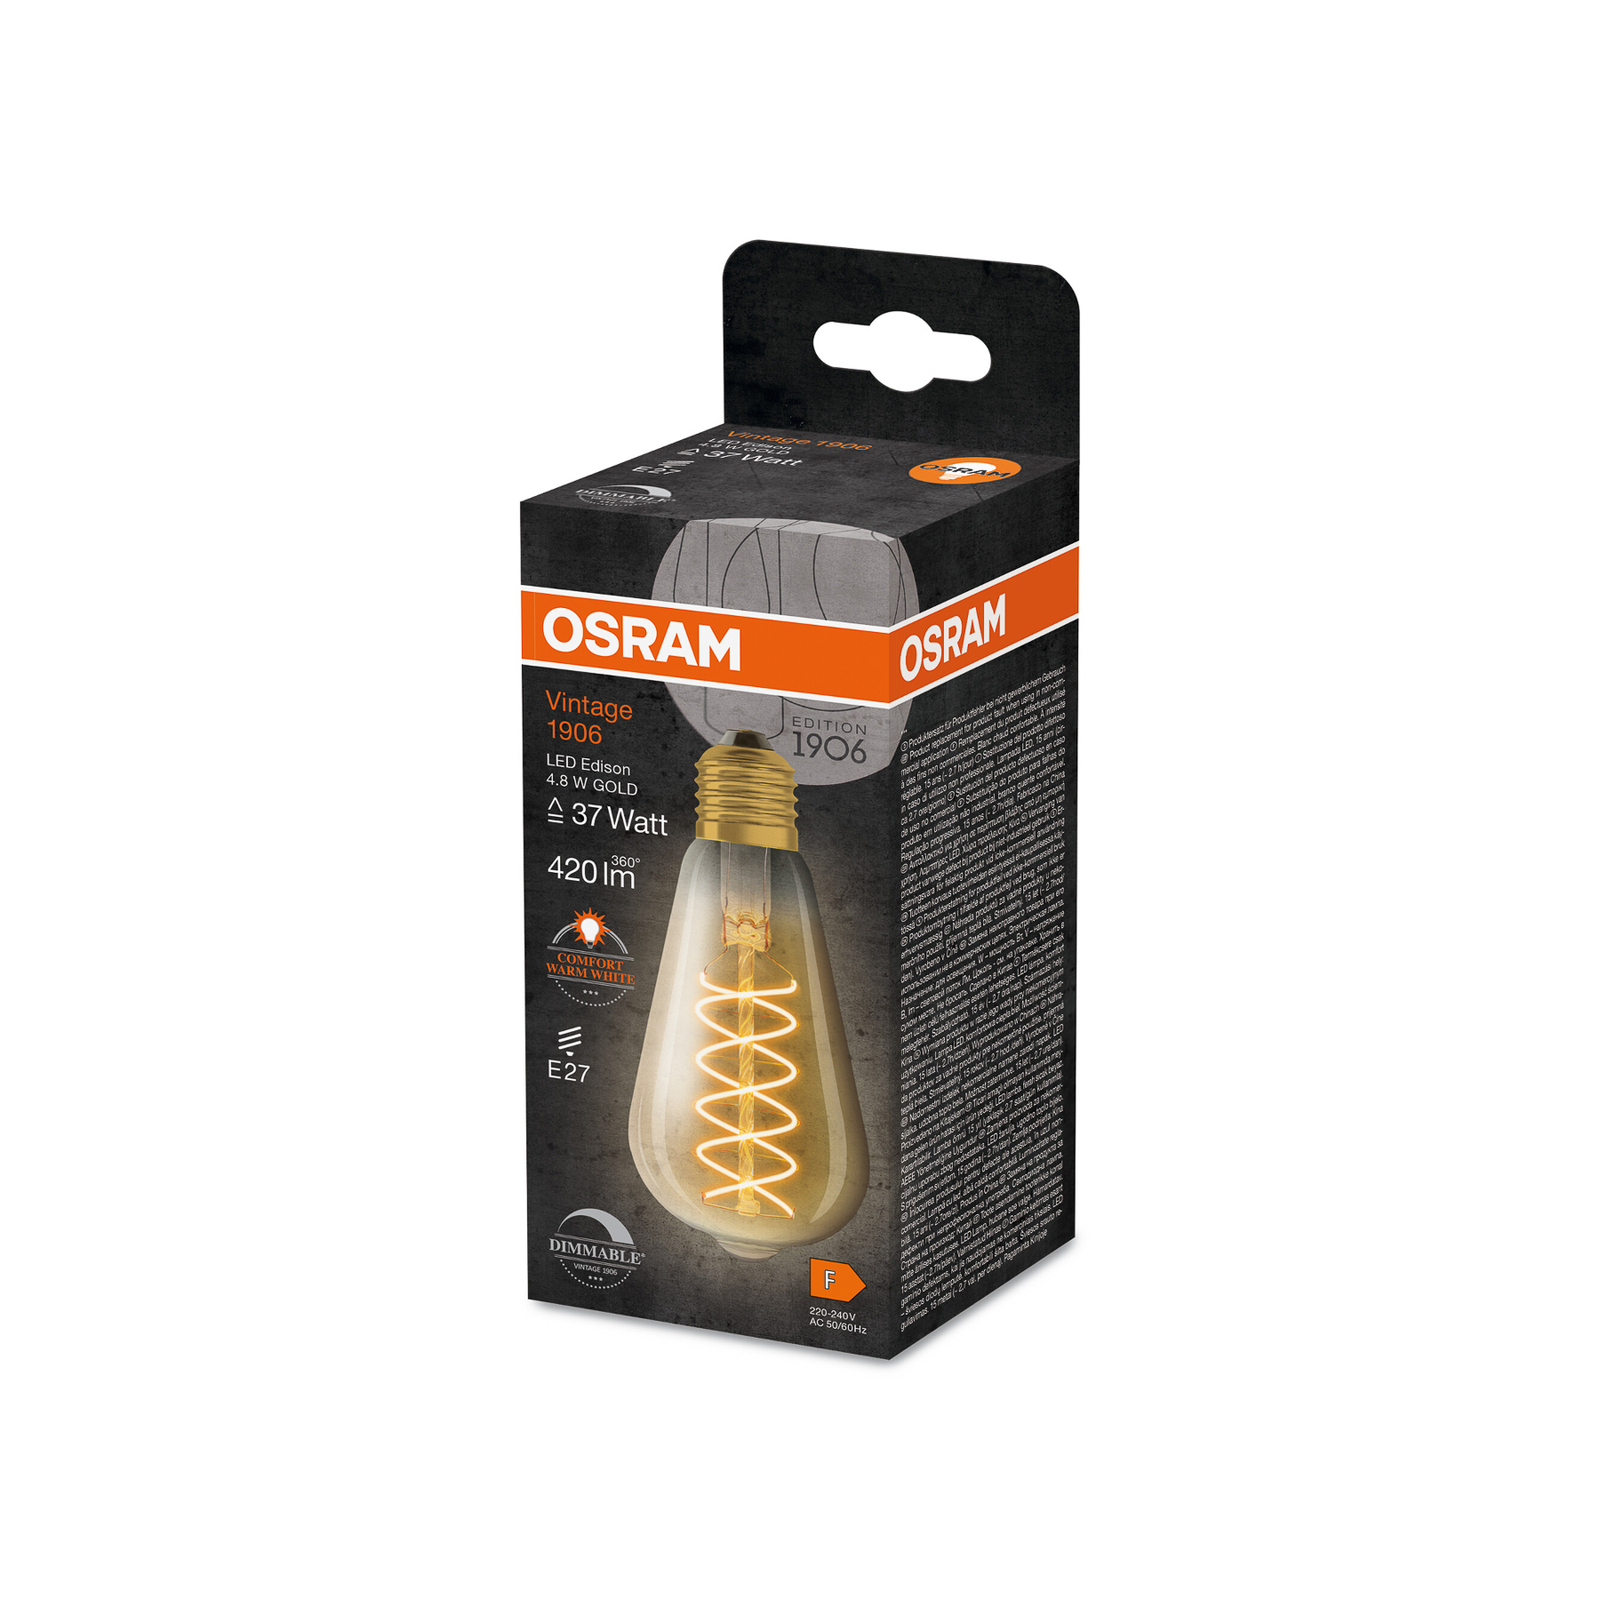 OSRAM LED Vintage 1906 Edison, gold, E27, 4.8 W, 822, dimmable.